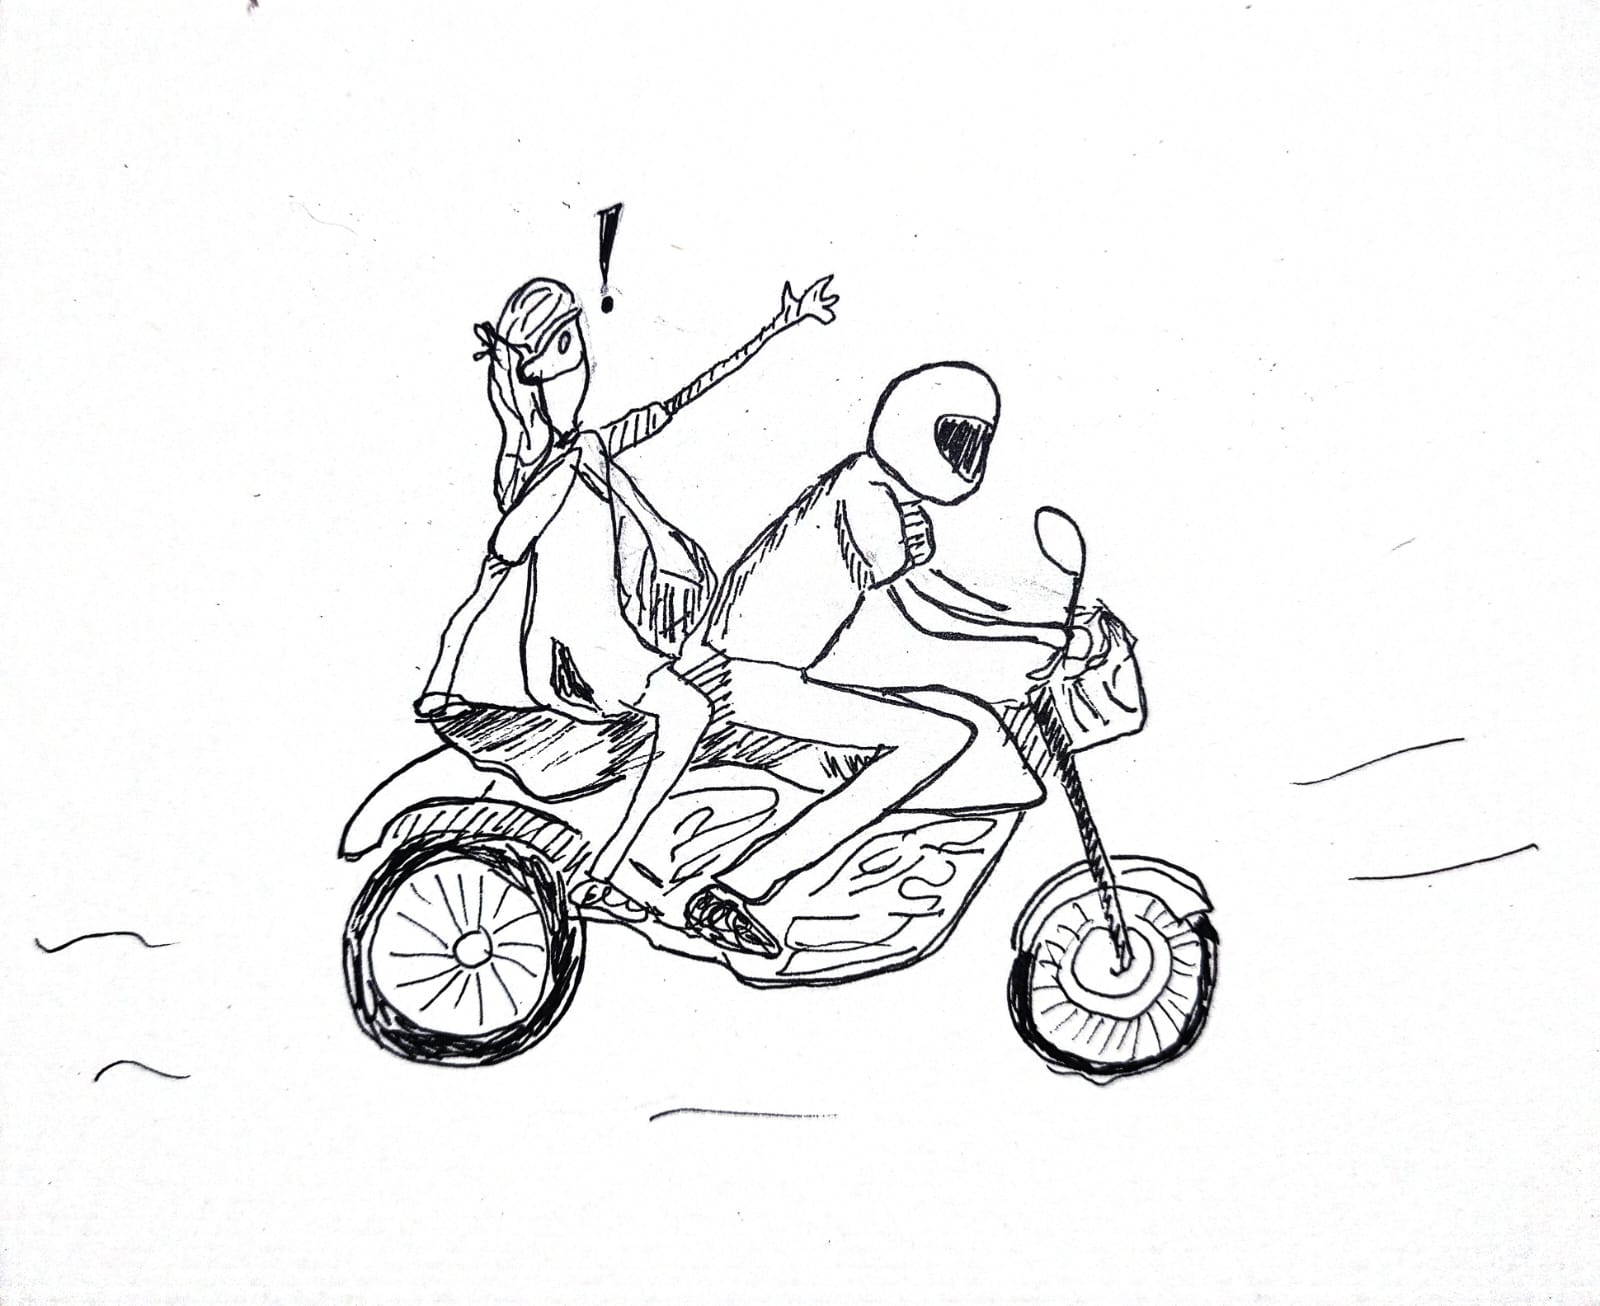 an illustration of a person riding a bike taxi with a scared expression